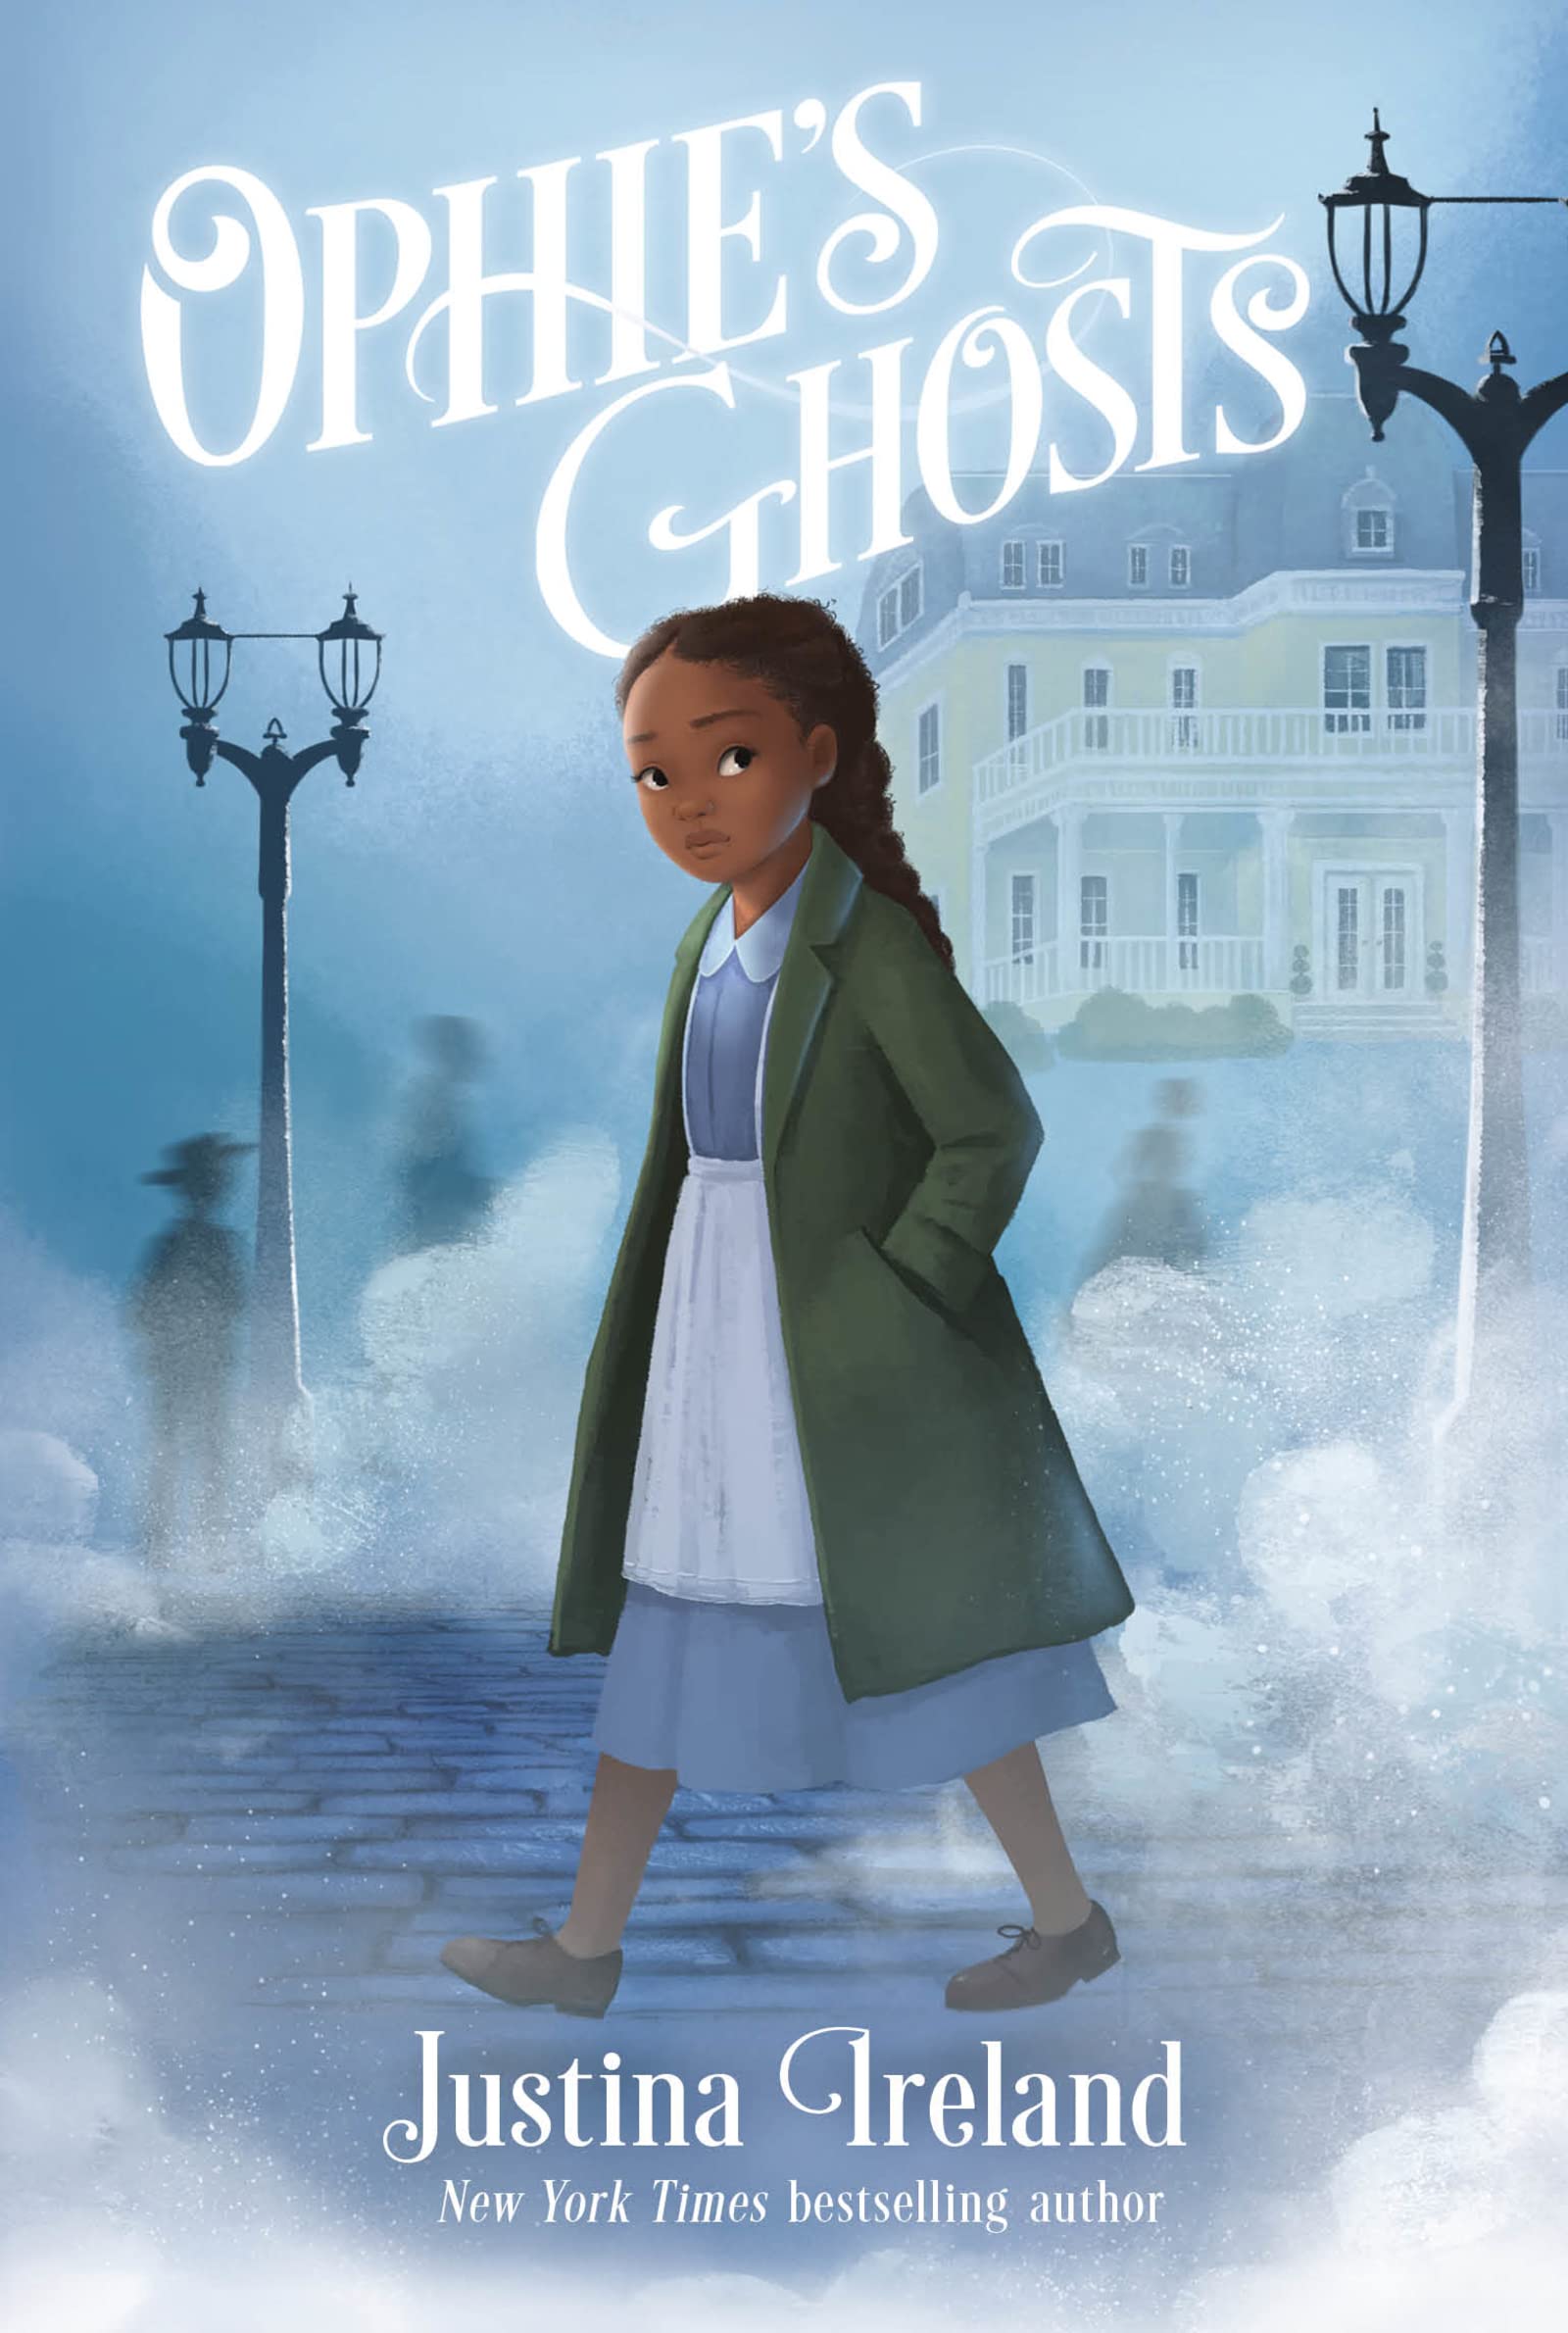 Ophie’s Ghosts by Justina Ireland